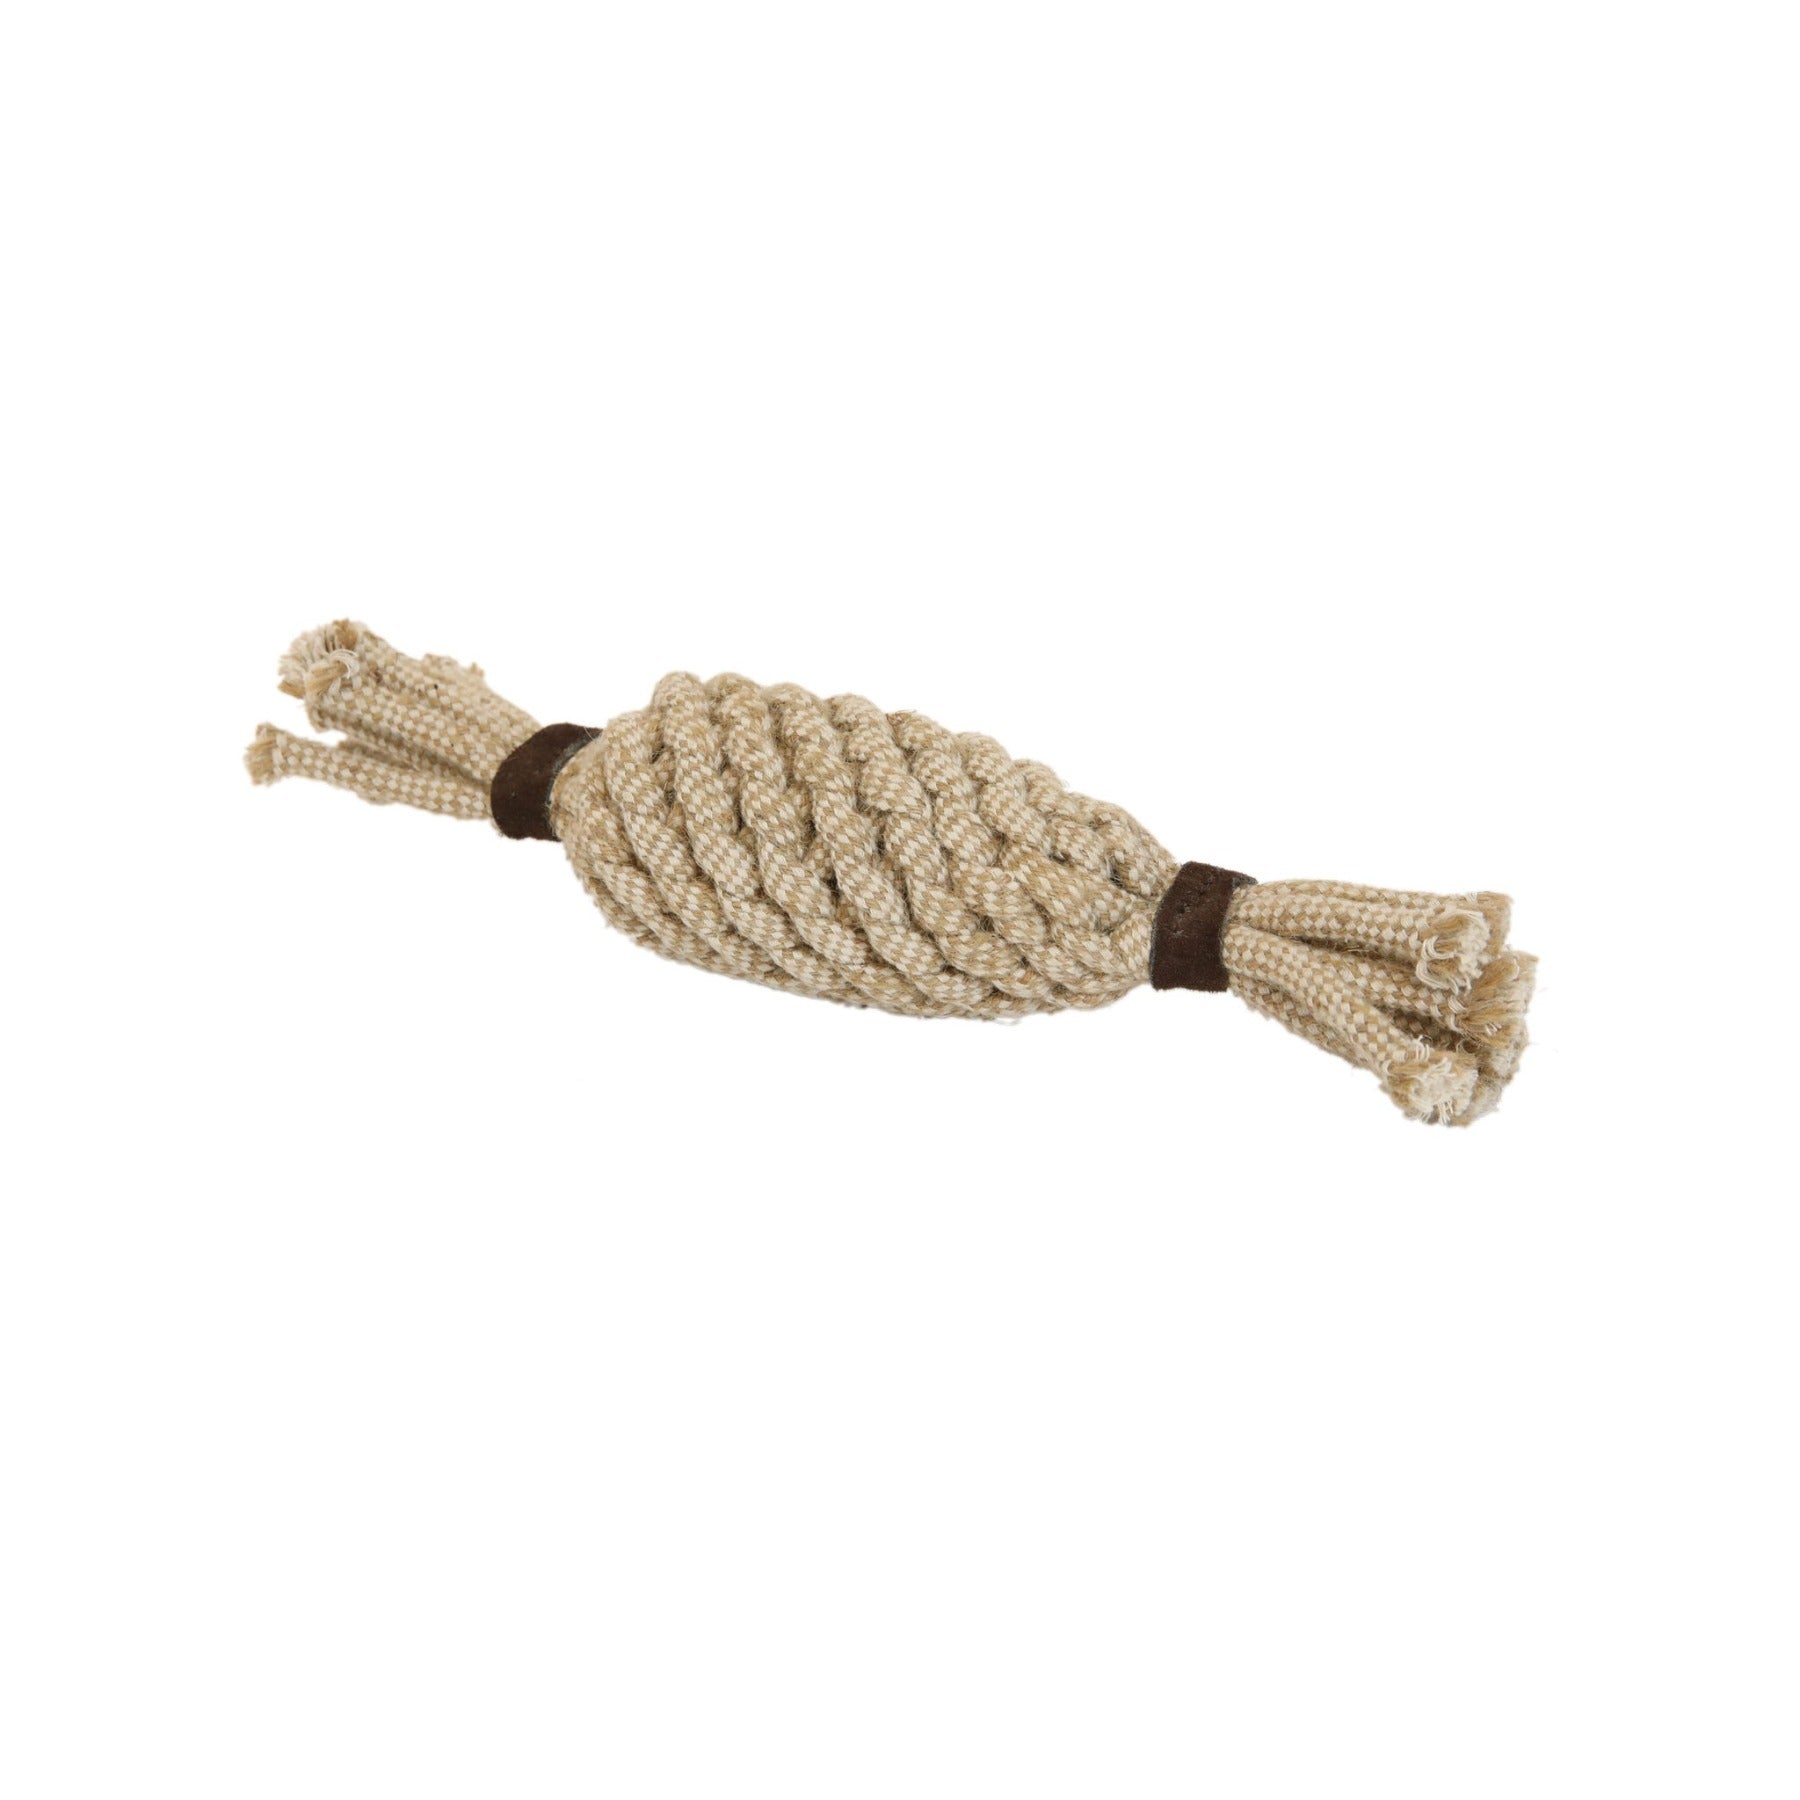 Kentucky Dog Toy Cotton Rope Pineapple